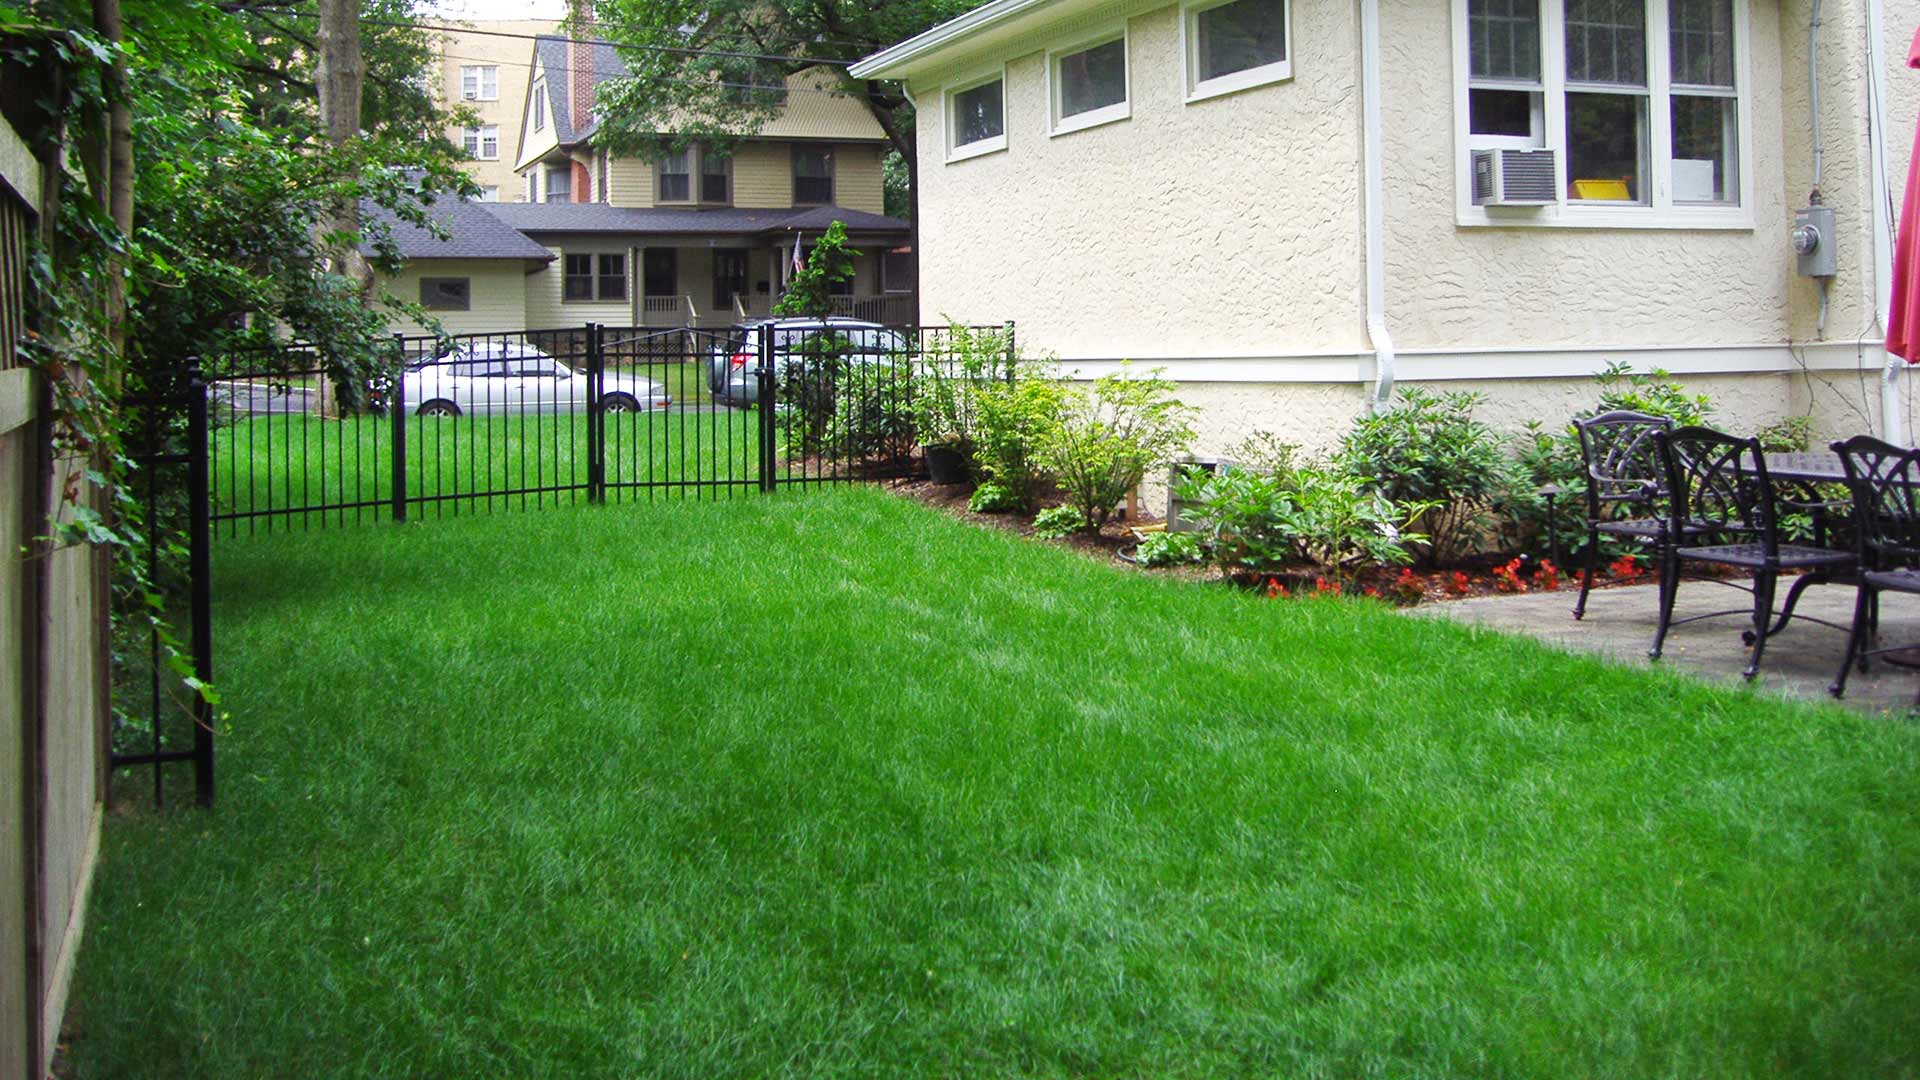 This thick lawn is the result of lawn renovation services from Stream Line Lawn & Landscape.